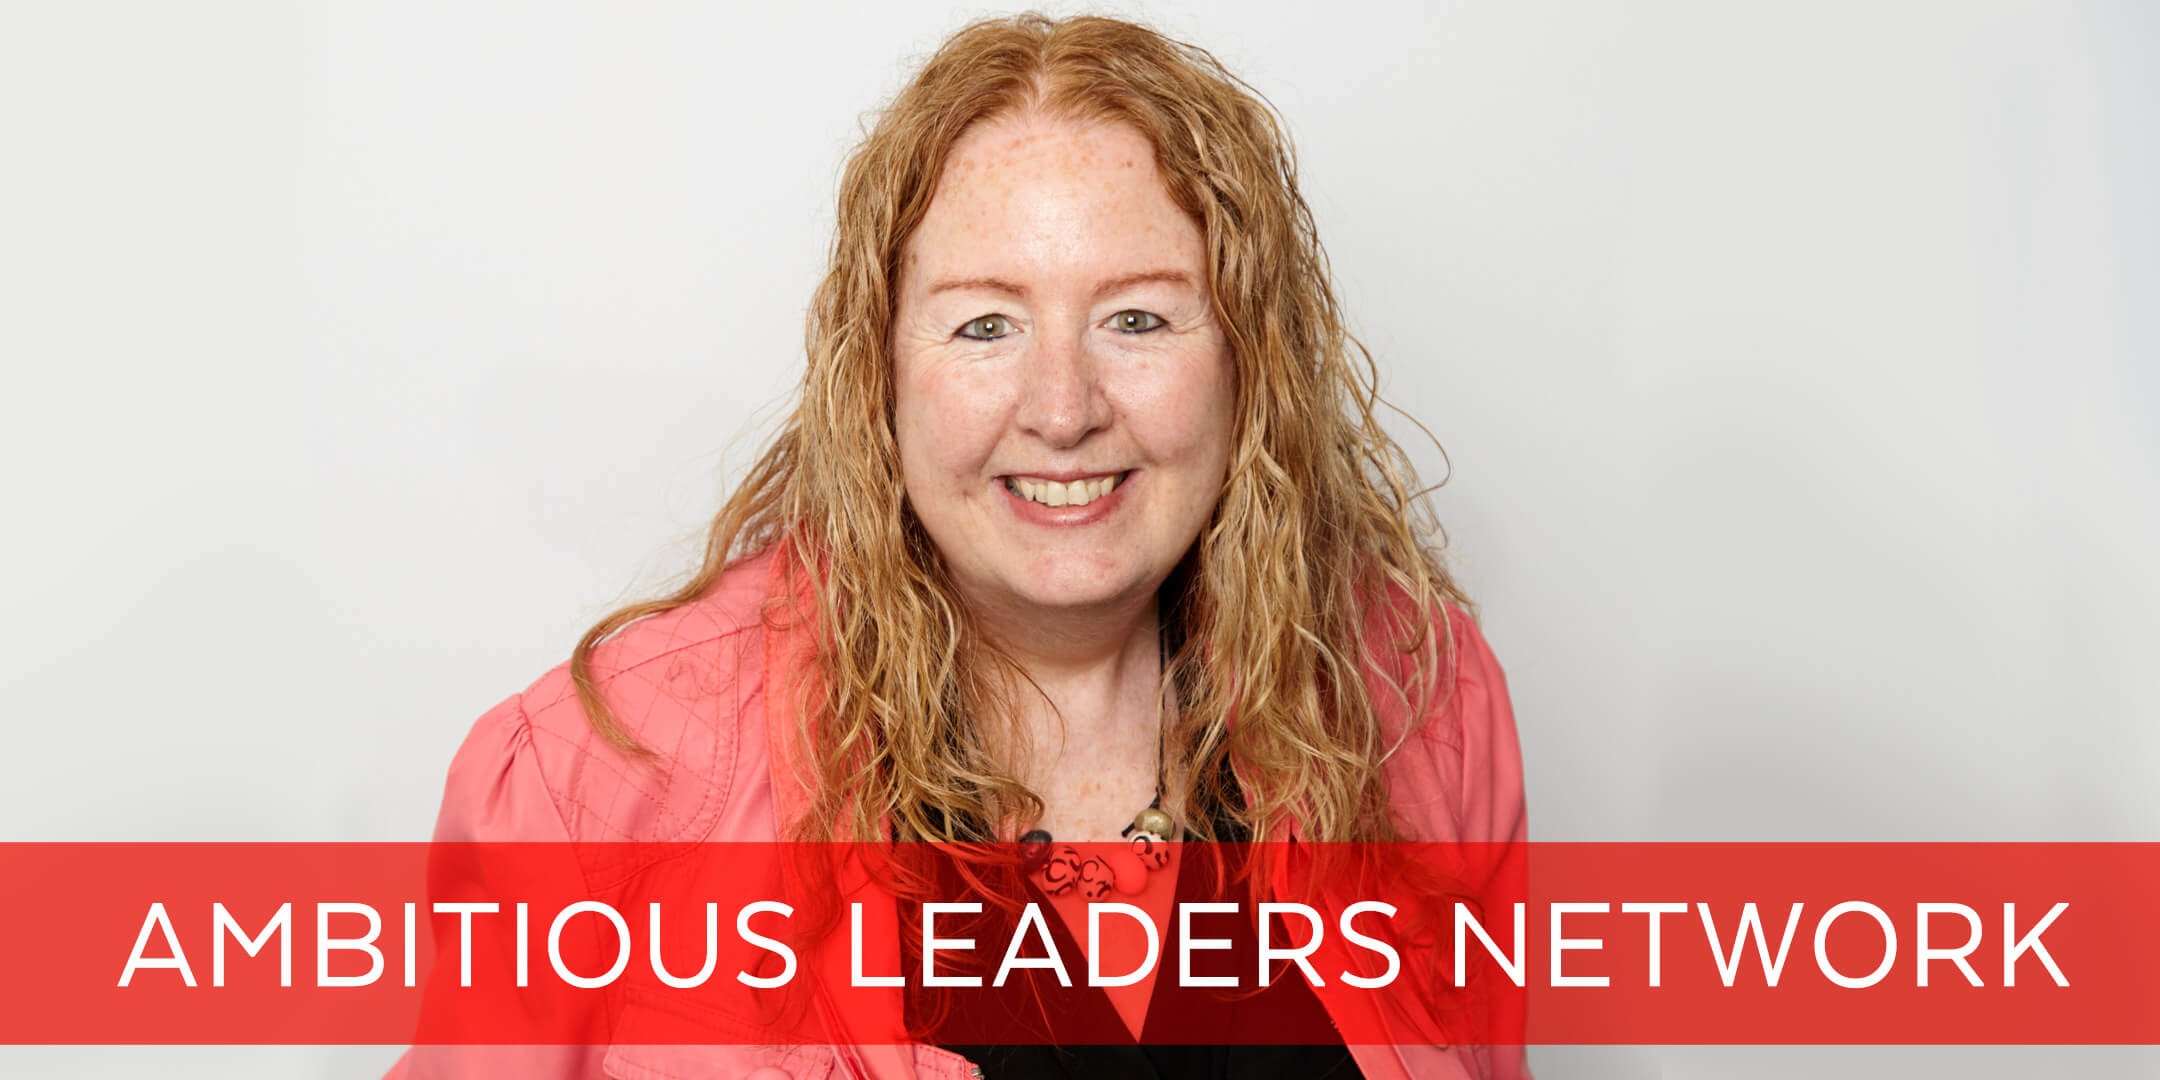 Mary Jensen - Speaker At The Ambitious Leaders Network